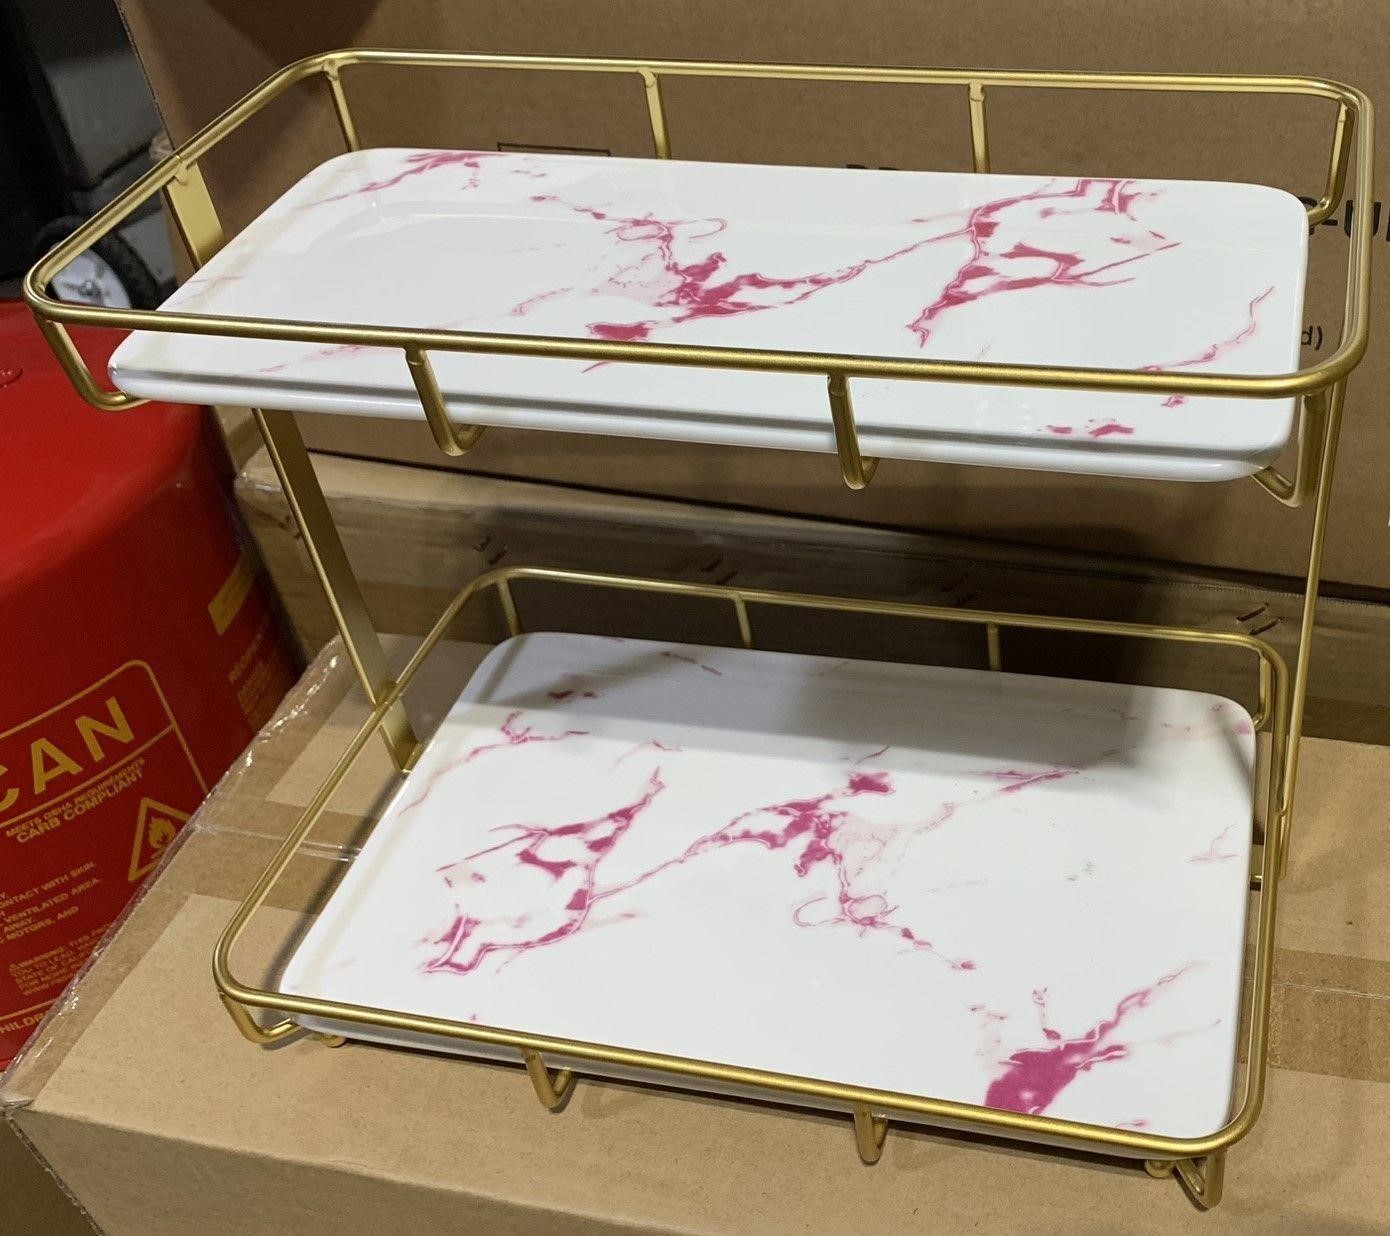 Ceramic Marble Double Tray Organizer Gold $72